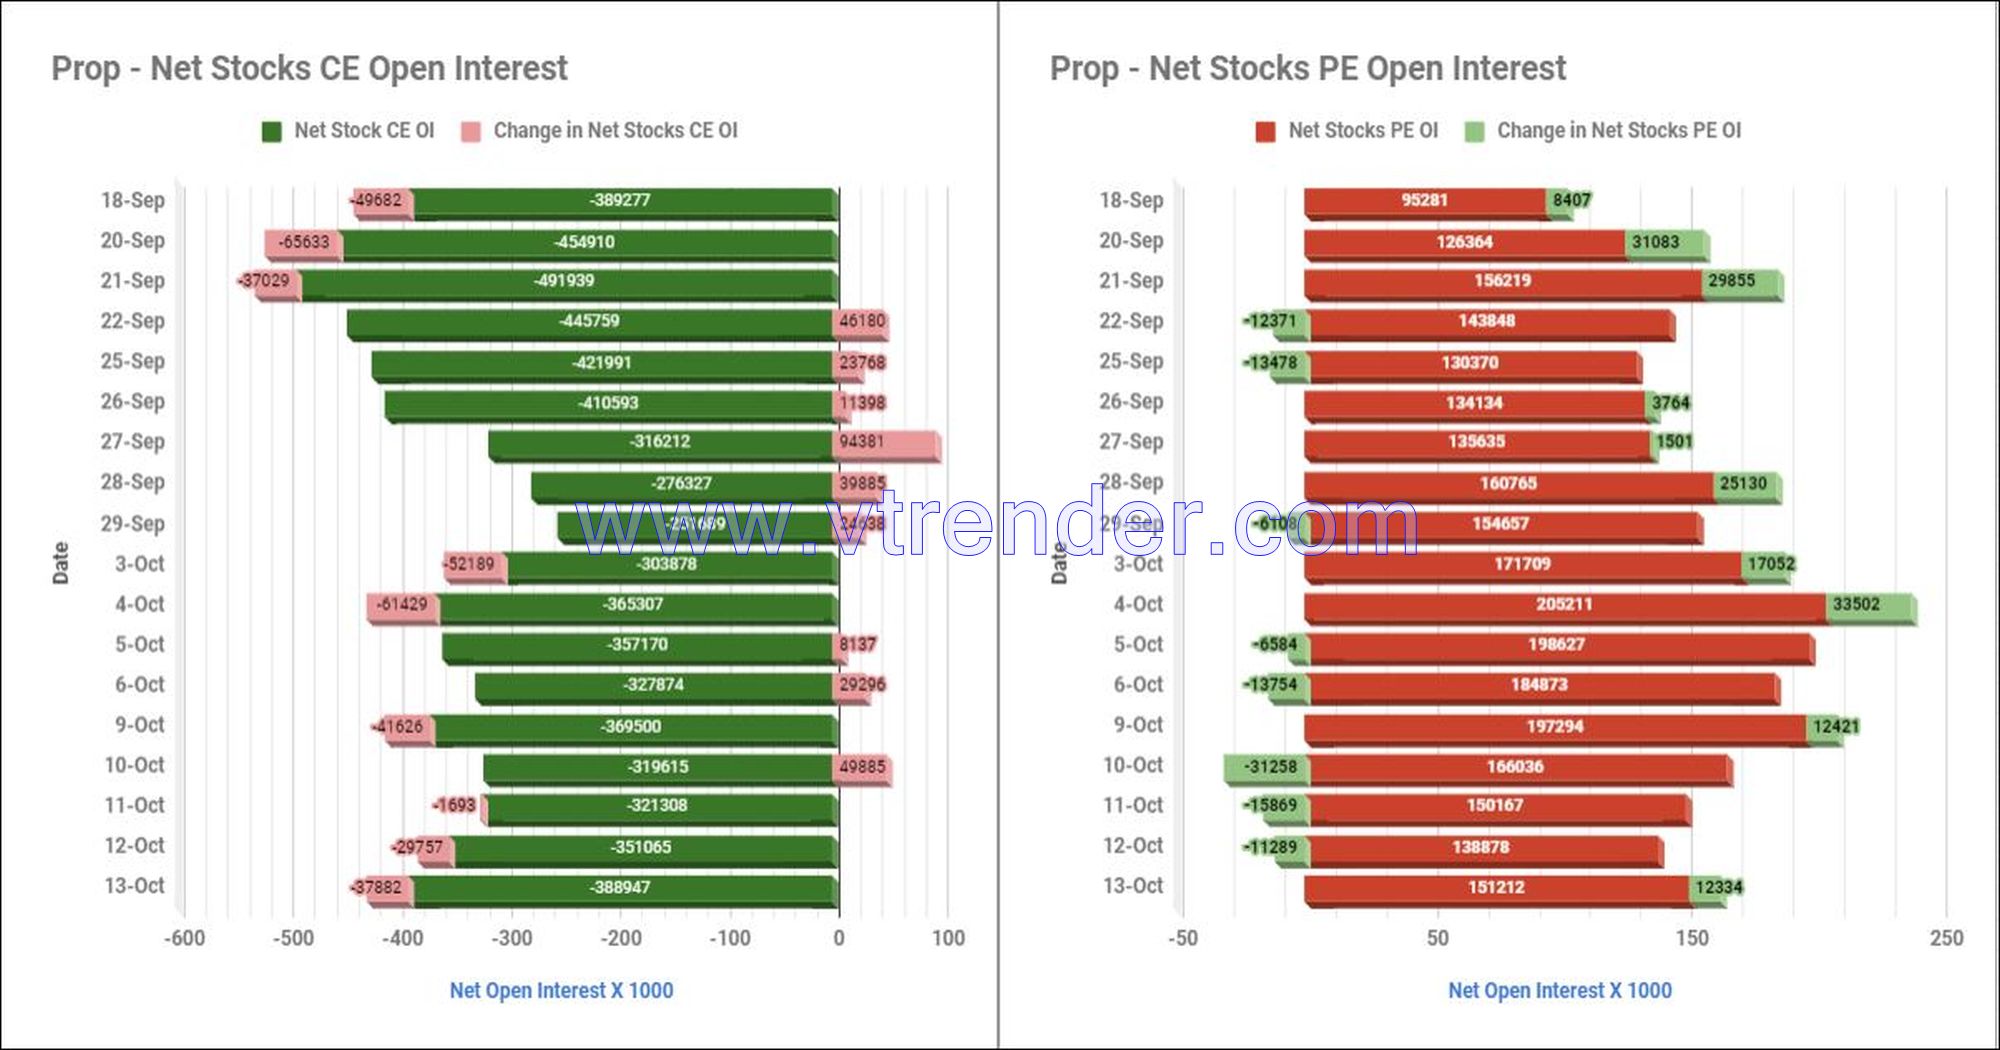 Prostop13Oct Participantwise Net Open Interest And Net Equity Investments – 13Th Oct 2023 Ce, Client, Dii, Fii, Index Futures, Index Options, Open Interest, Pe, Prop, Stocks Futures